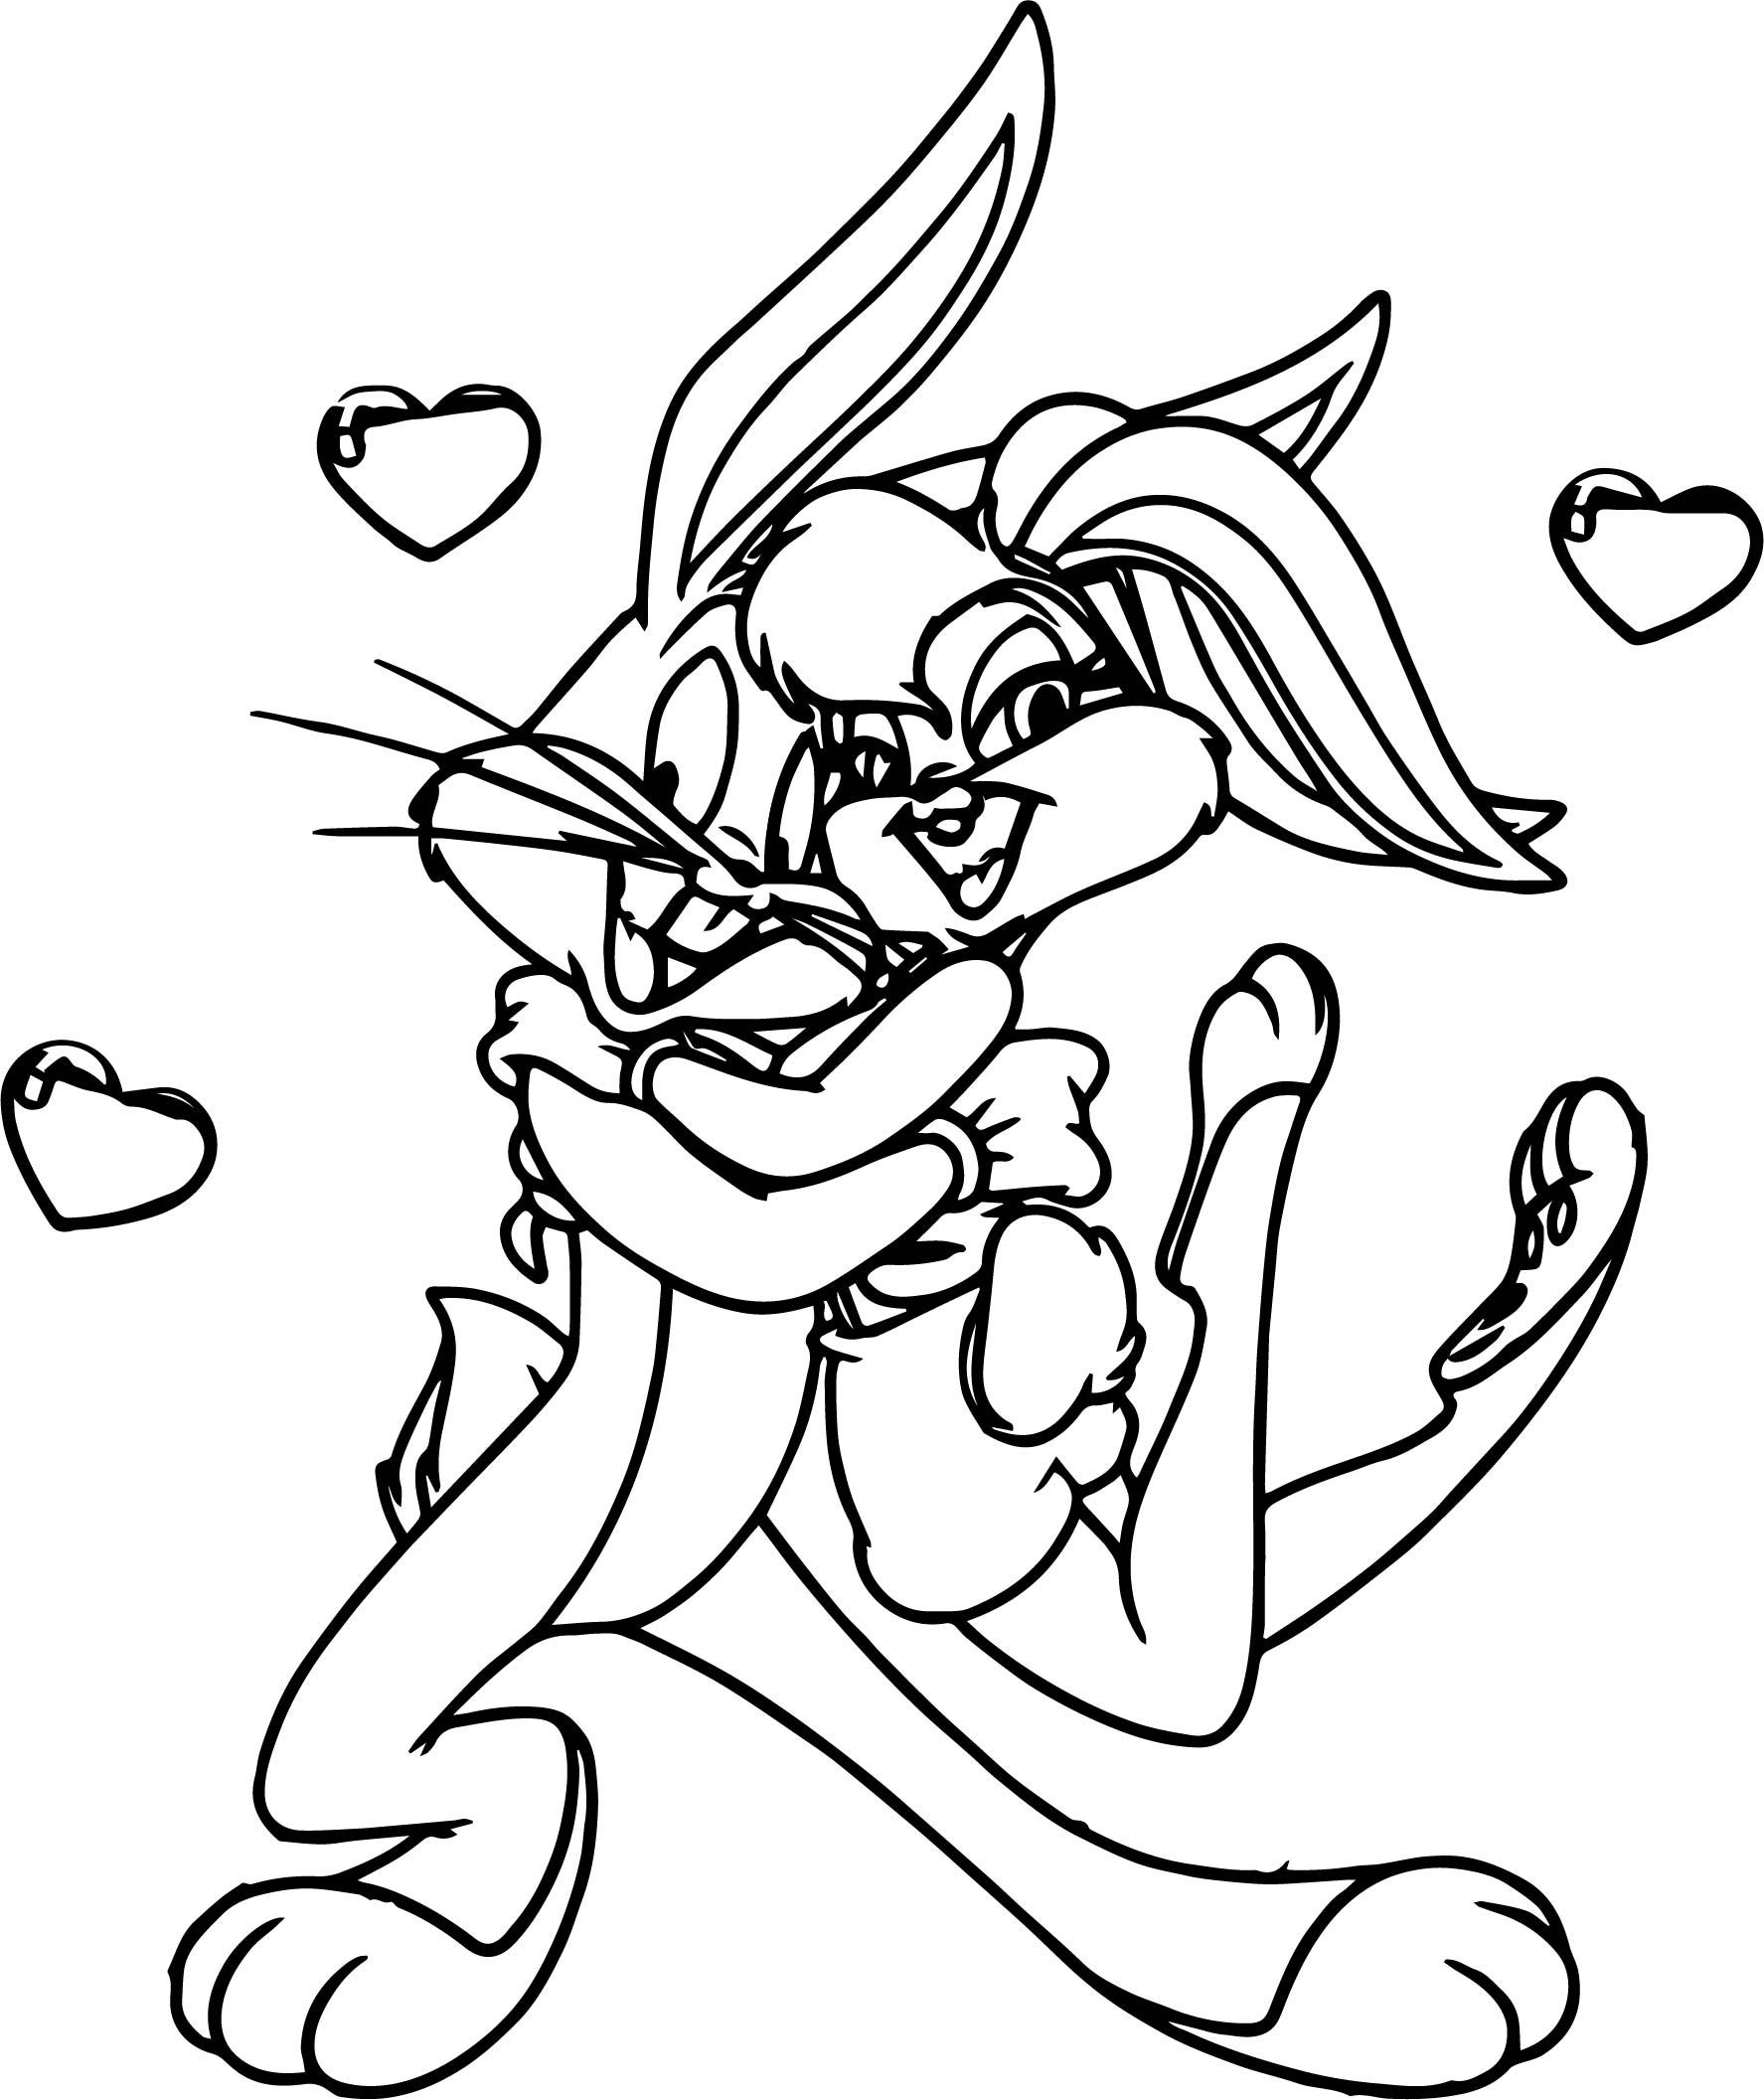 Cool Baby Bugs Bunny And Lola Love Coloring Page | Wecoloringpage In - Free Printable Bugs Bunny Coloring Pages